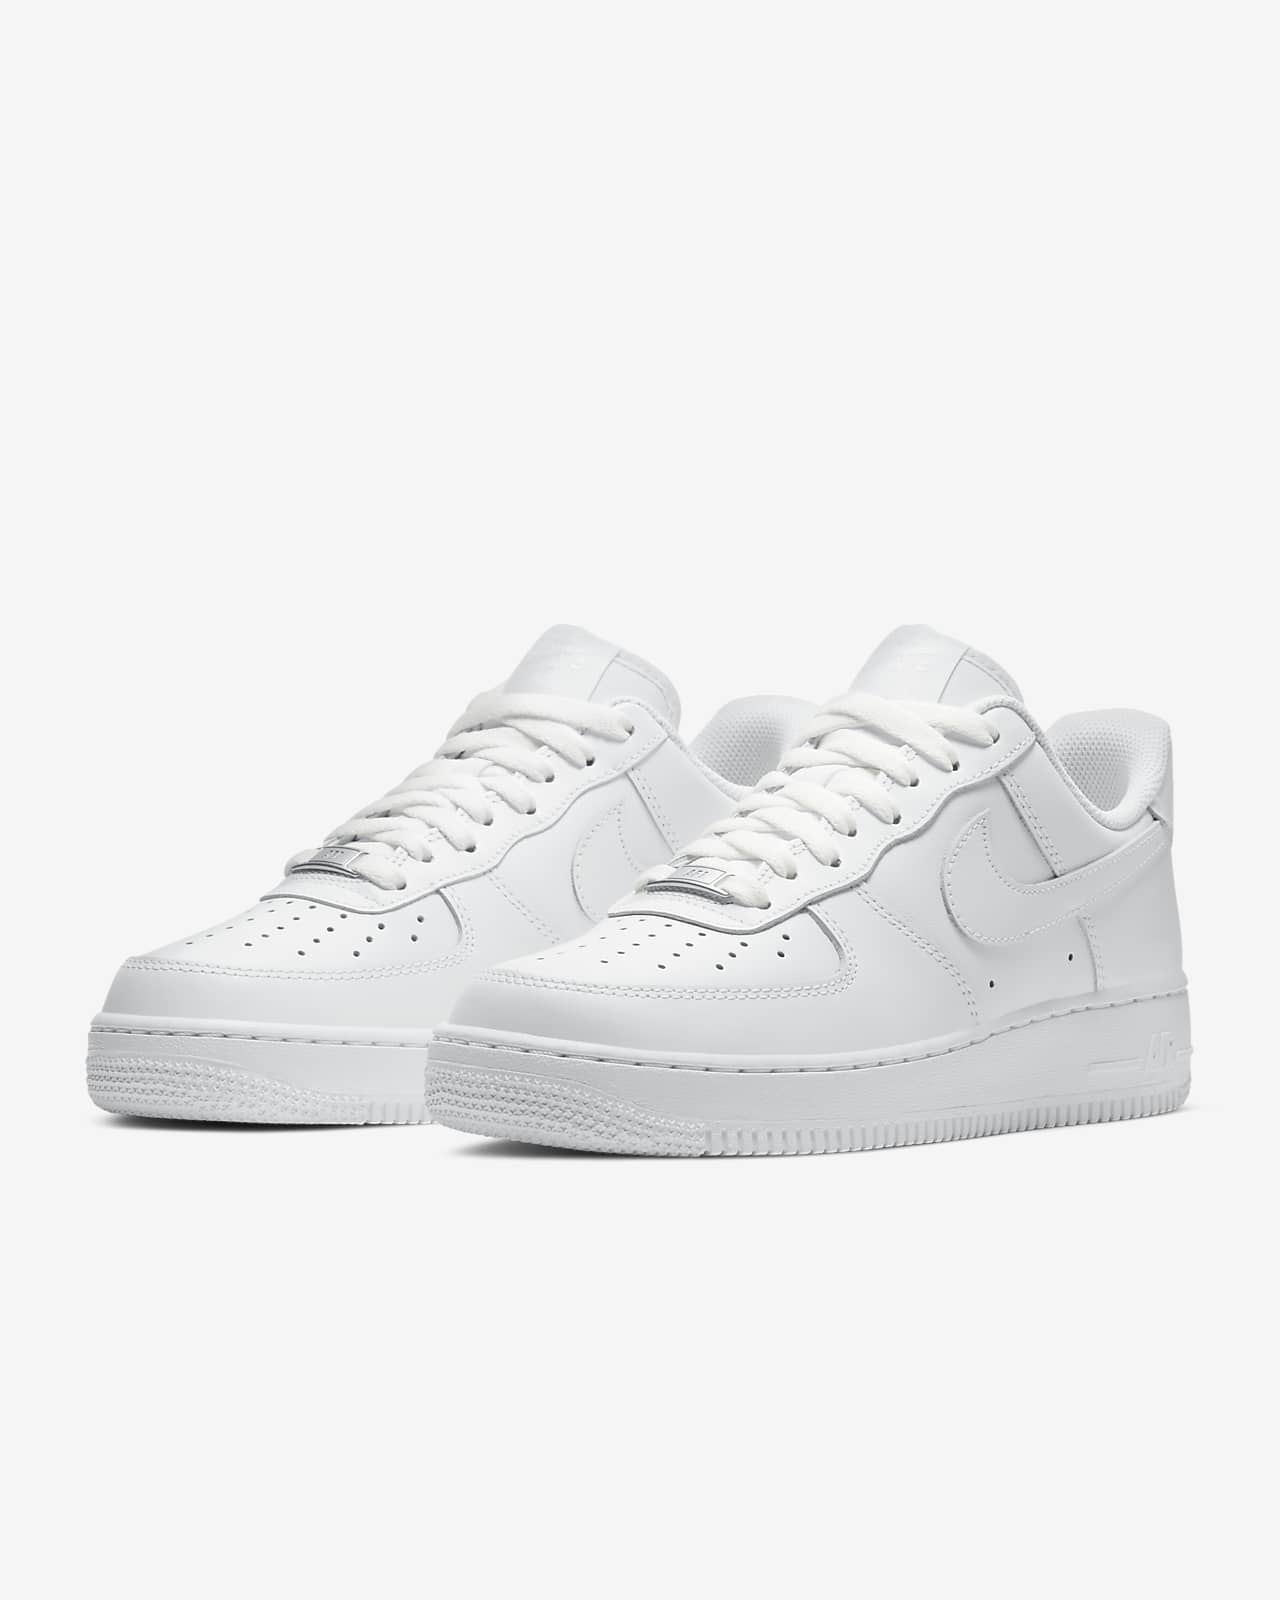 white nike air force 1 size 8